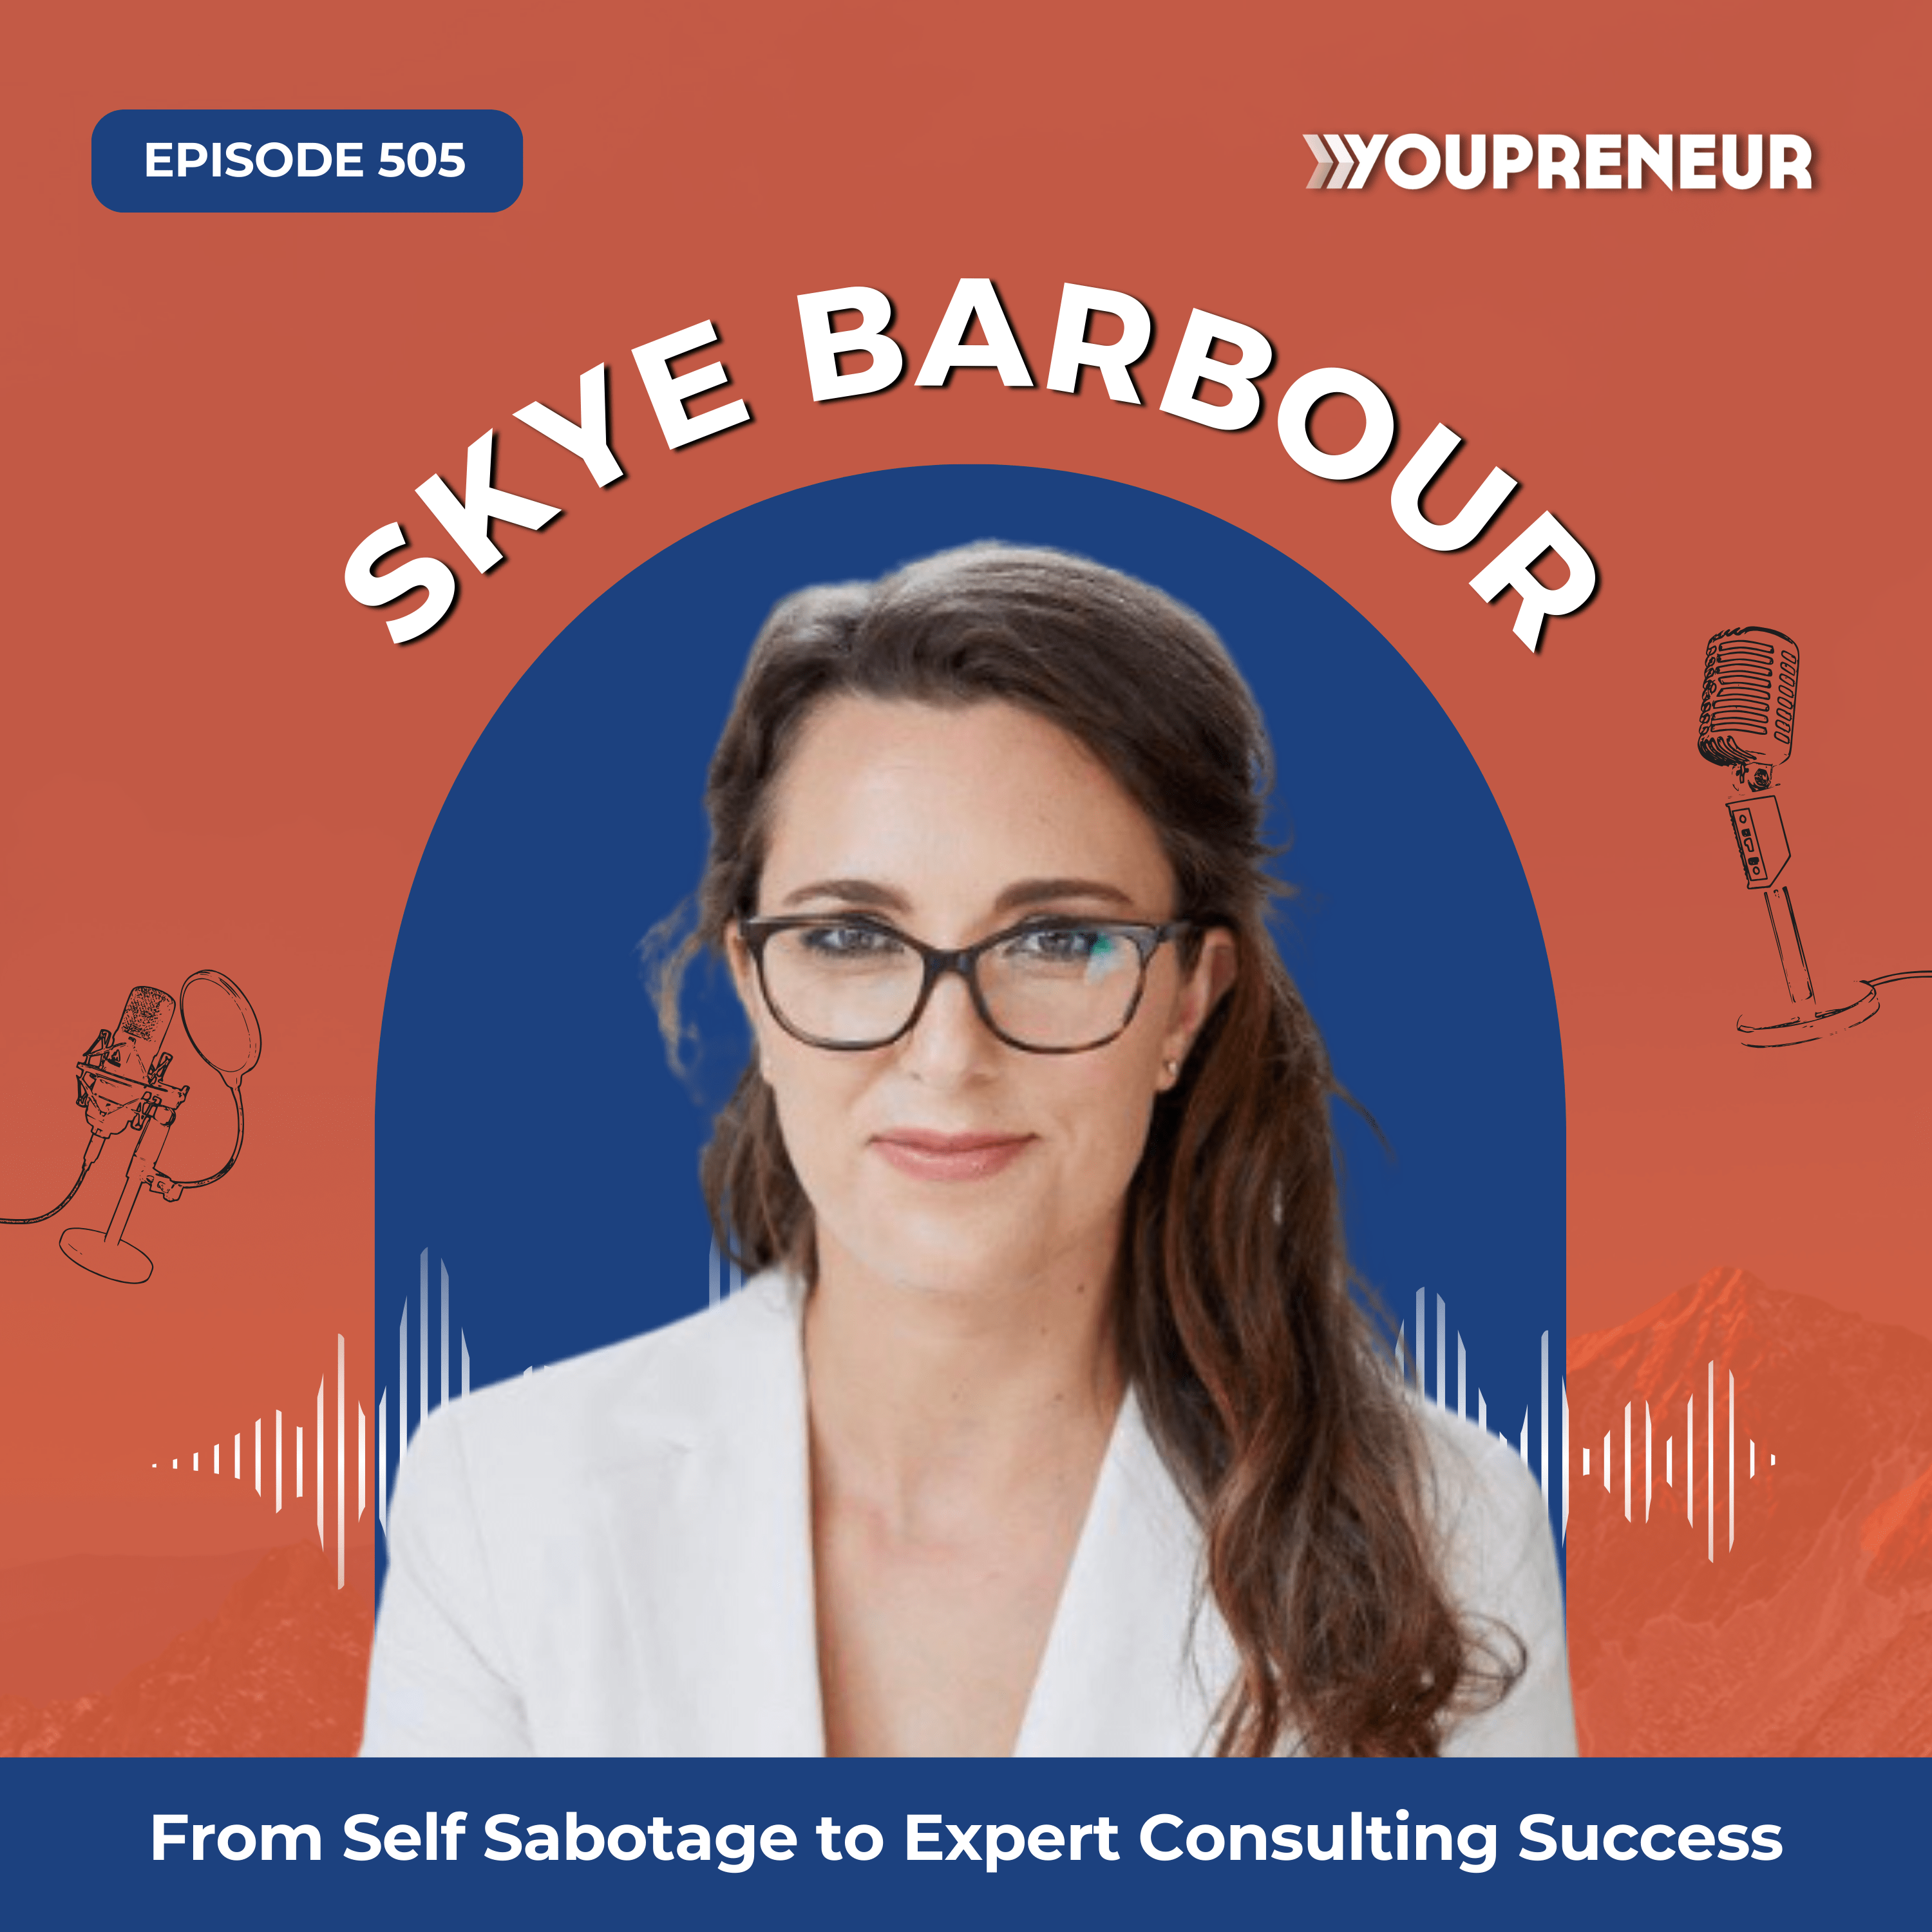 From Self Sabotage to Expert Consulting Success with Skye Barbour